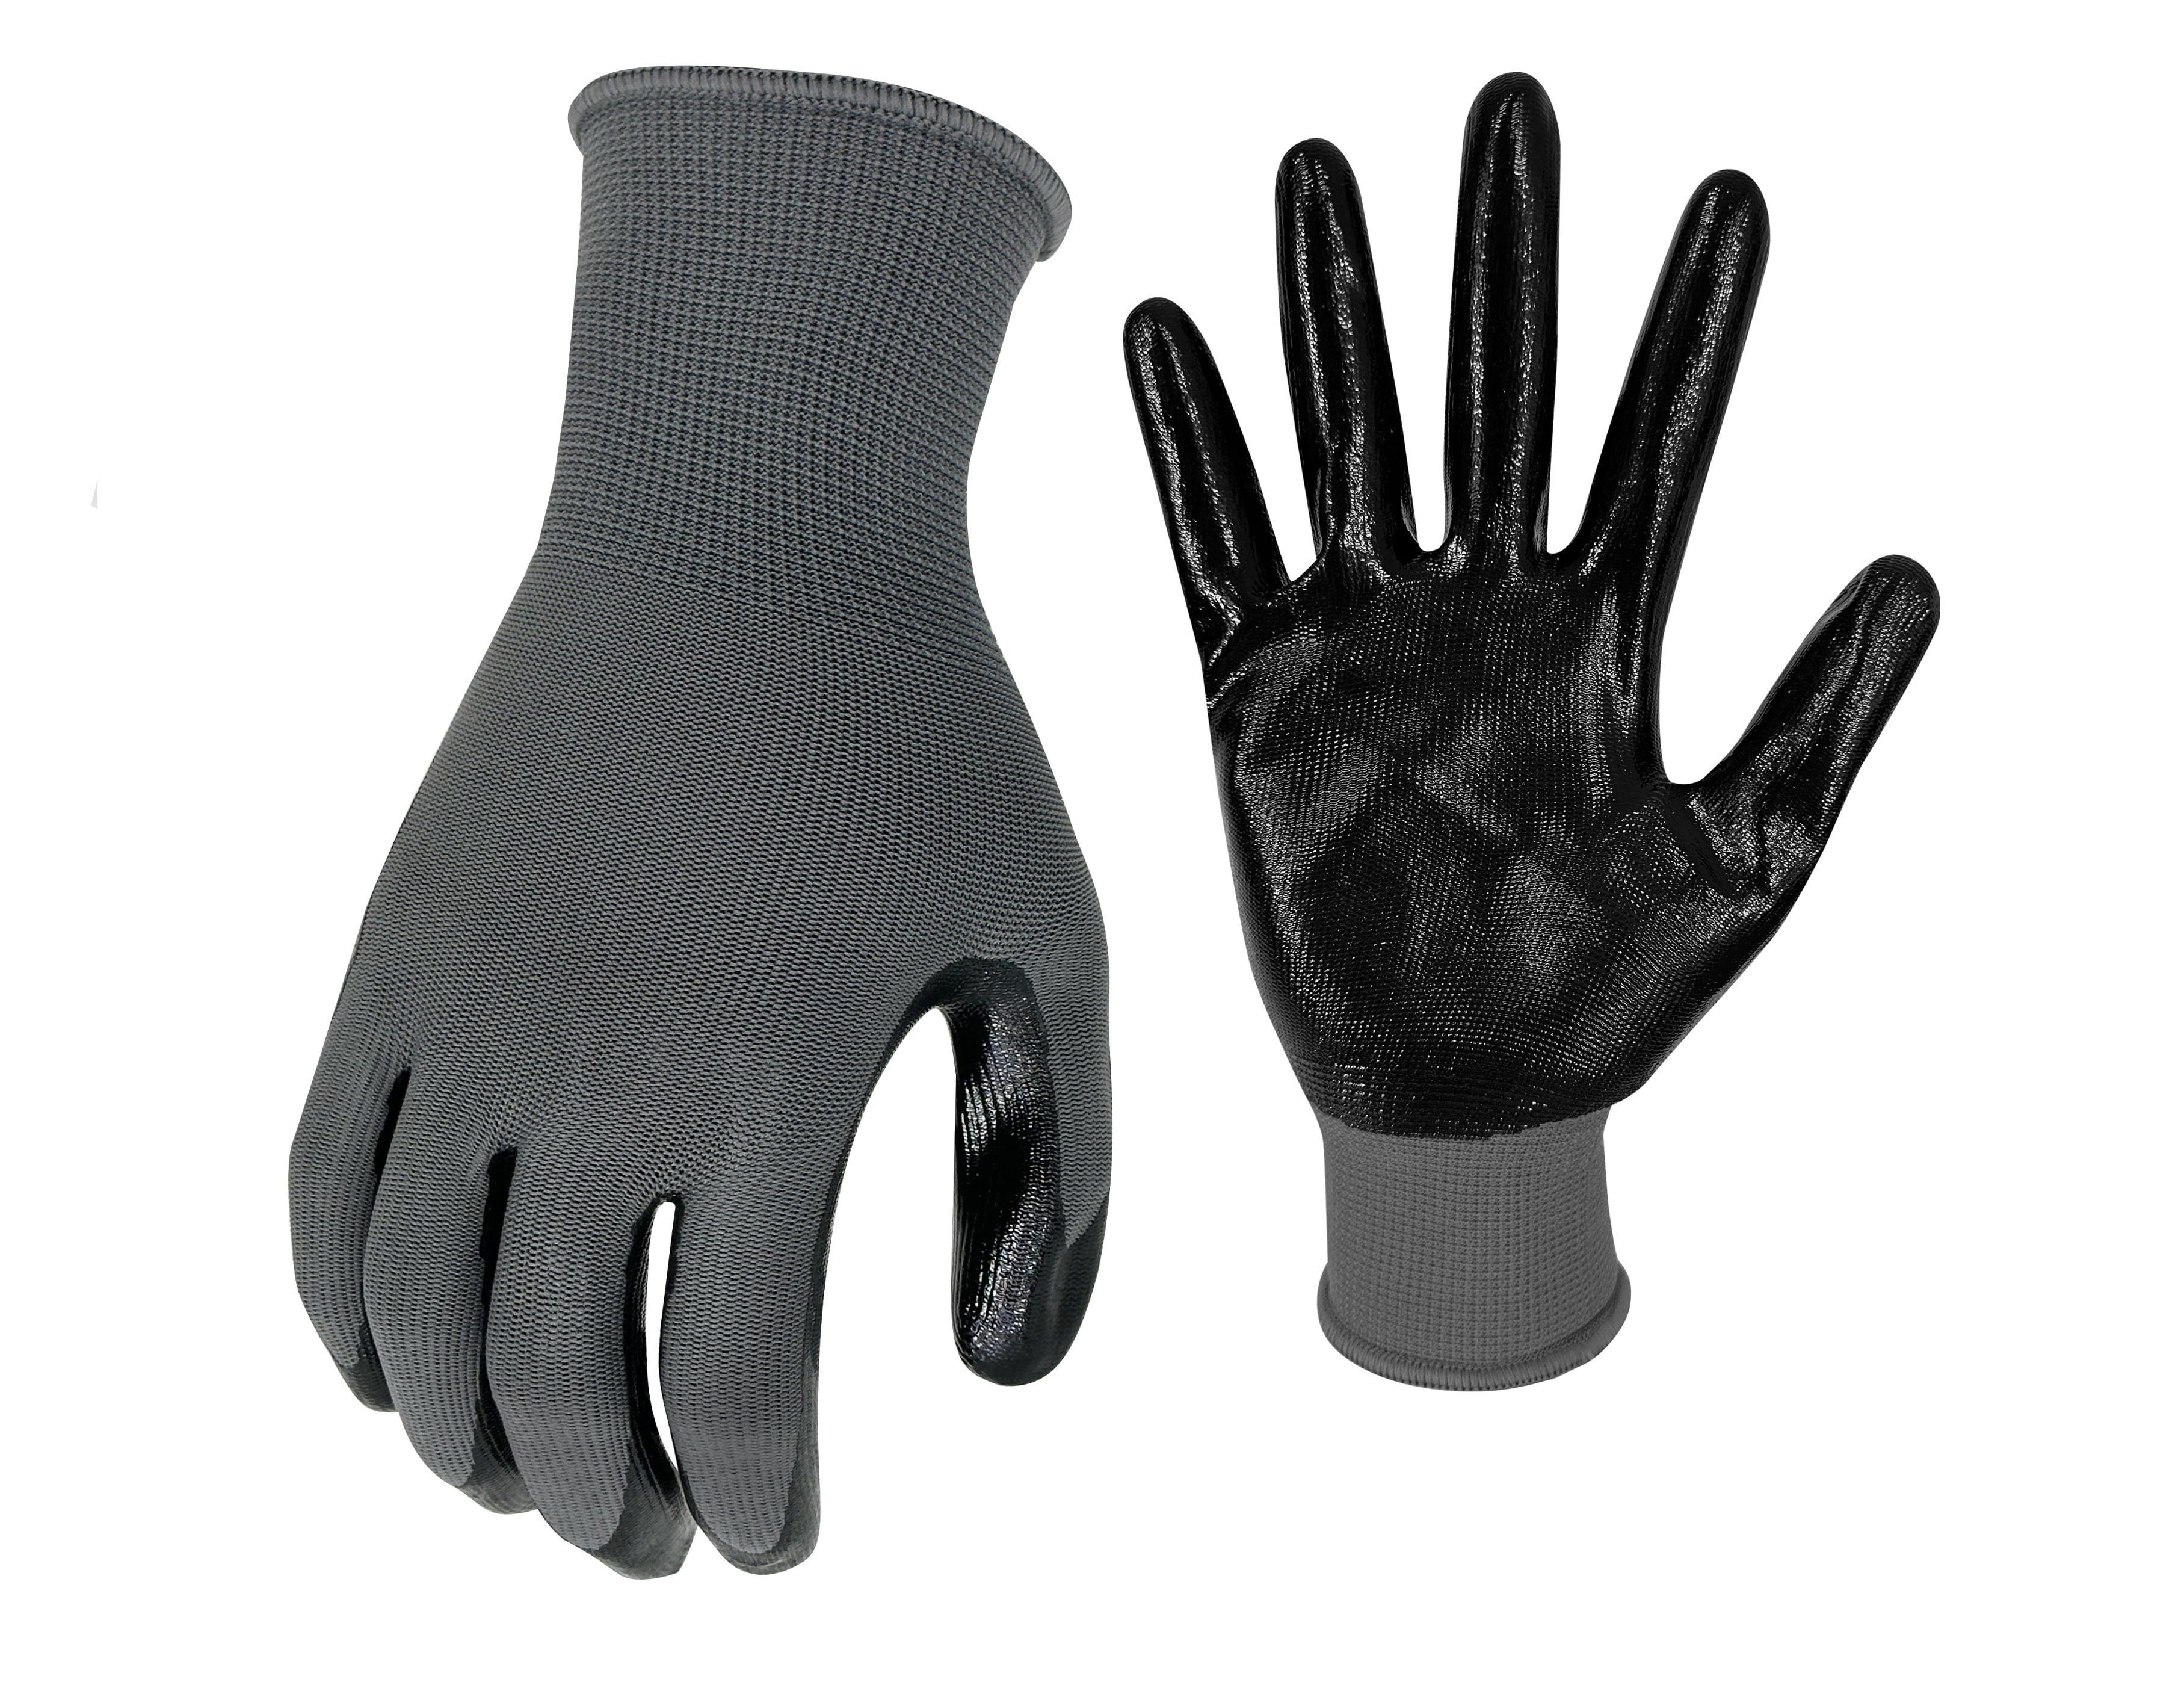 Hyper Tough 3 Pack, Nitrile Grip Gloves, Gray, Latex Free, Large 